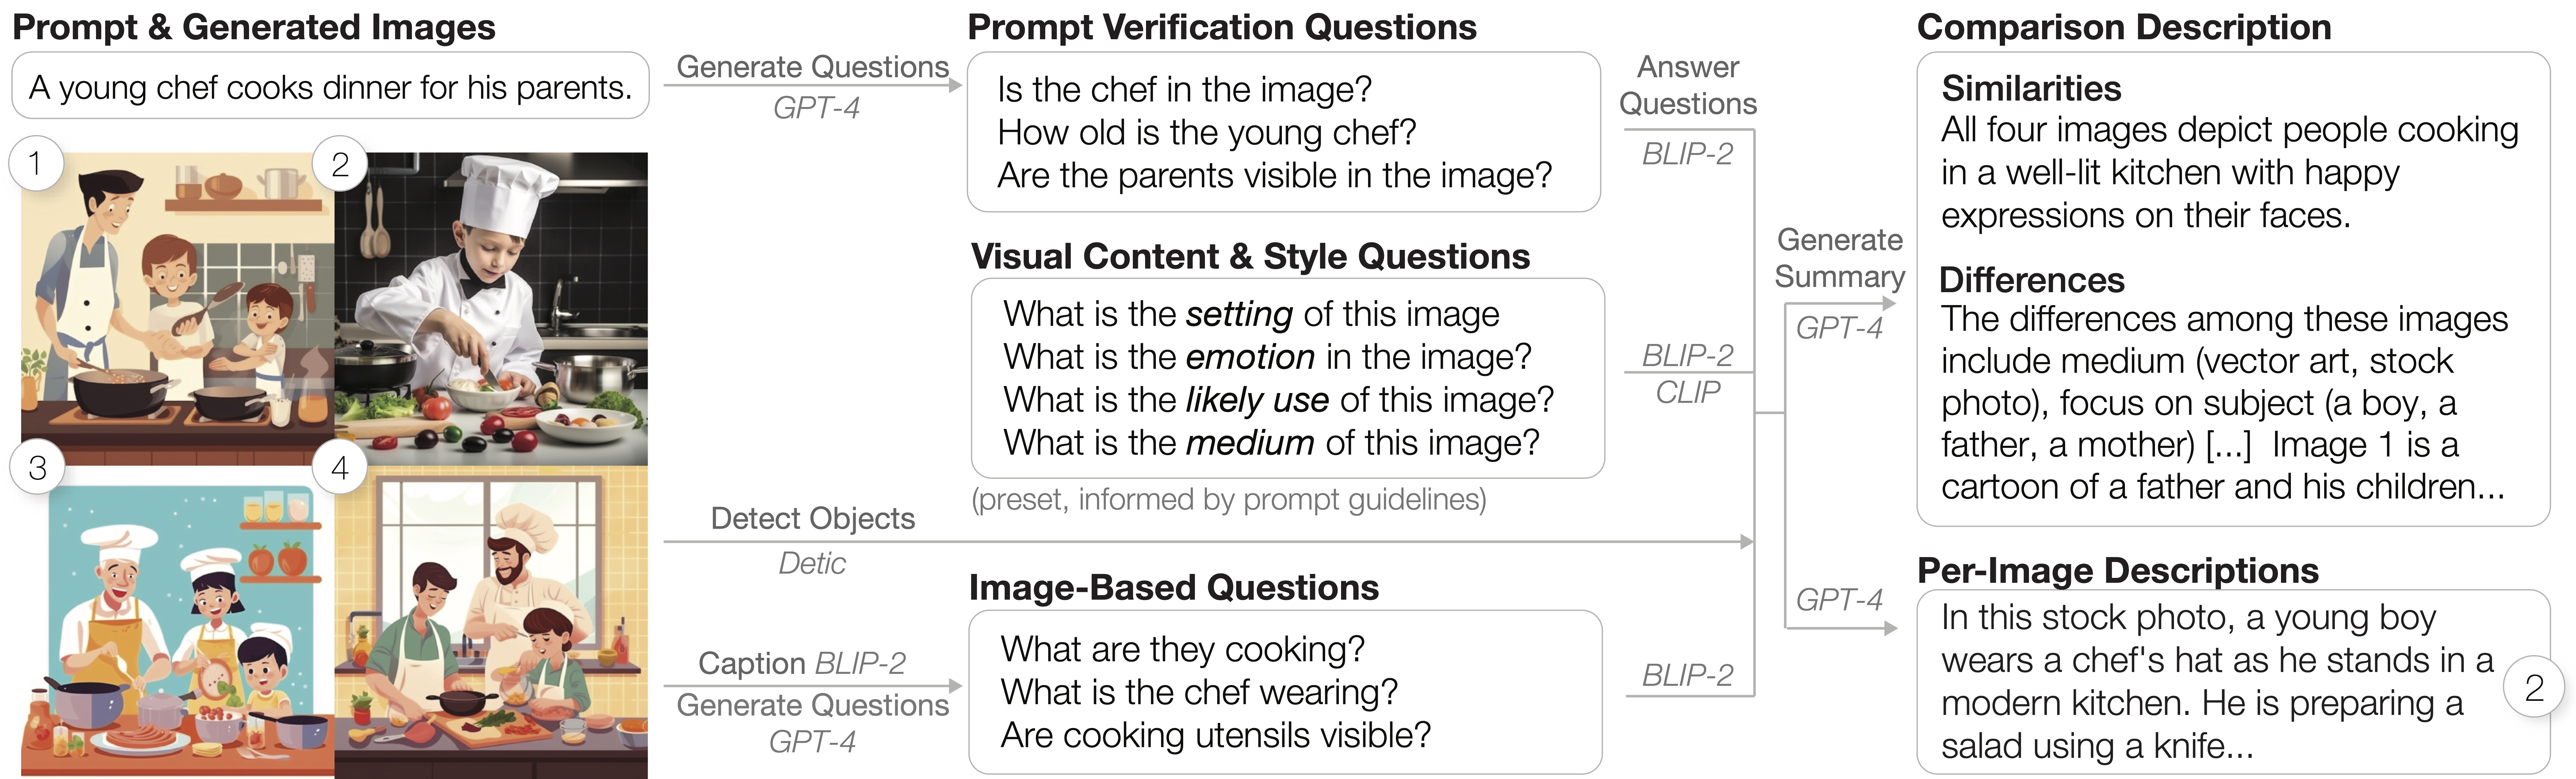 Teaser image that illustrates how GenAssist generates the comparison description and per image descriptions in the summary table. First, GenAssist takes the input of text prompt ``A young chef is cooking dinner for his parents'' and the four images generated using the prompt. Then, based on the prompt, GenAssist uses GPT4 to ask prompt verification questions and use BLIP2 to answer them. GenAssist also asks questions based on the individual image captions using GPT4 and BLIP2. In addition to prompt verification questions and image based questions, GenAssist also asks questions related to visual content and styles and answer them using BLIP2, Detic and CLIP. Finally, using all of the visual information, the comparison description (similarities and differences) and the per image descriptions are generated using GPT4.